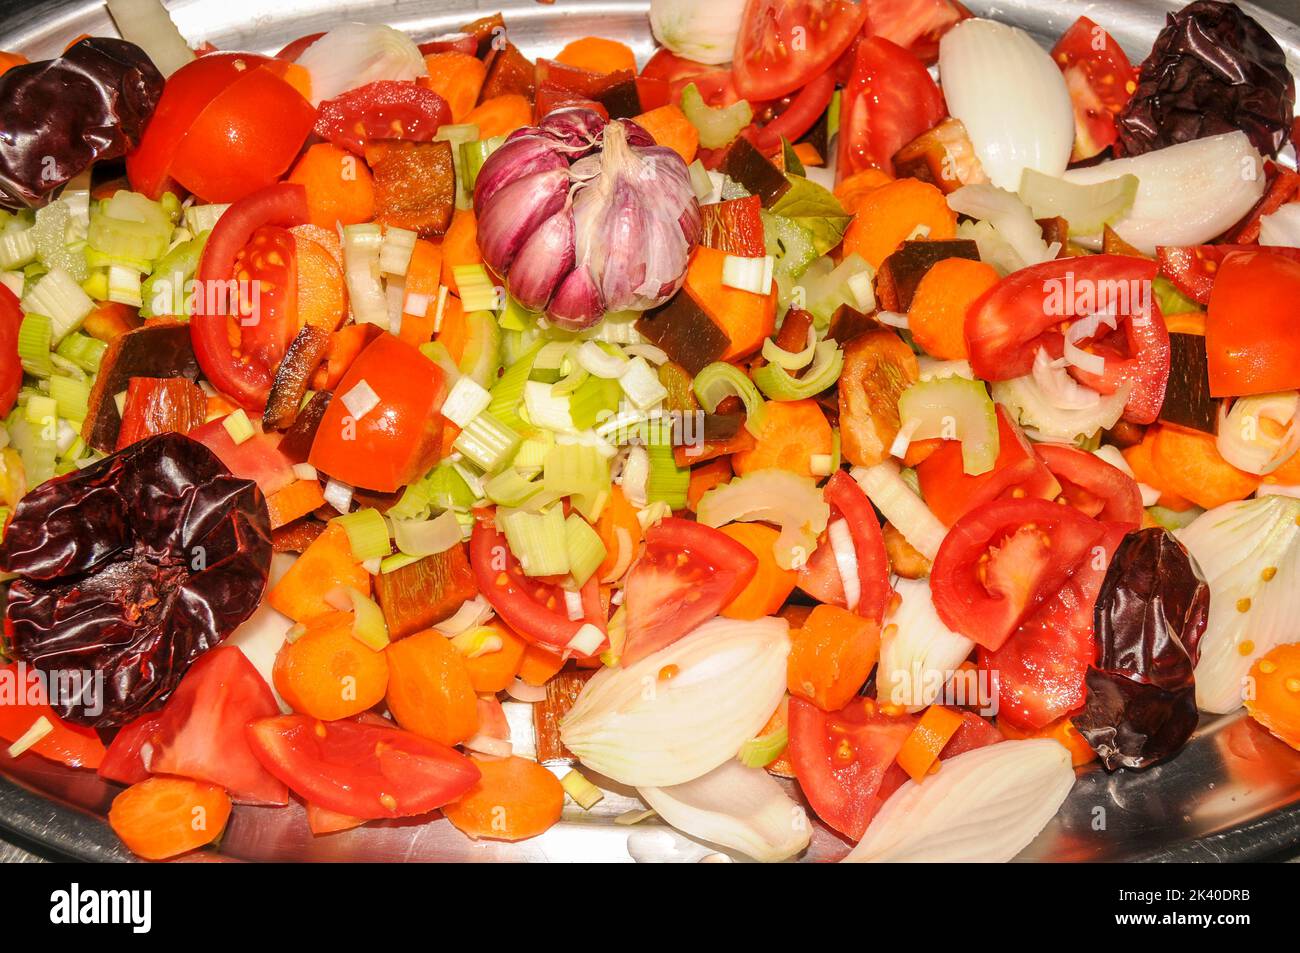 Vegetable ingredients to prepare a stew Stock Photo